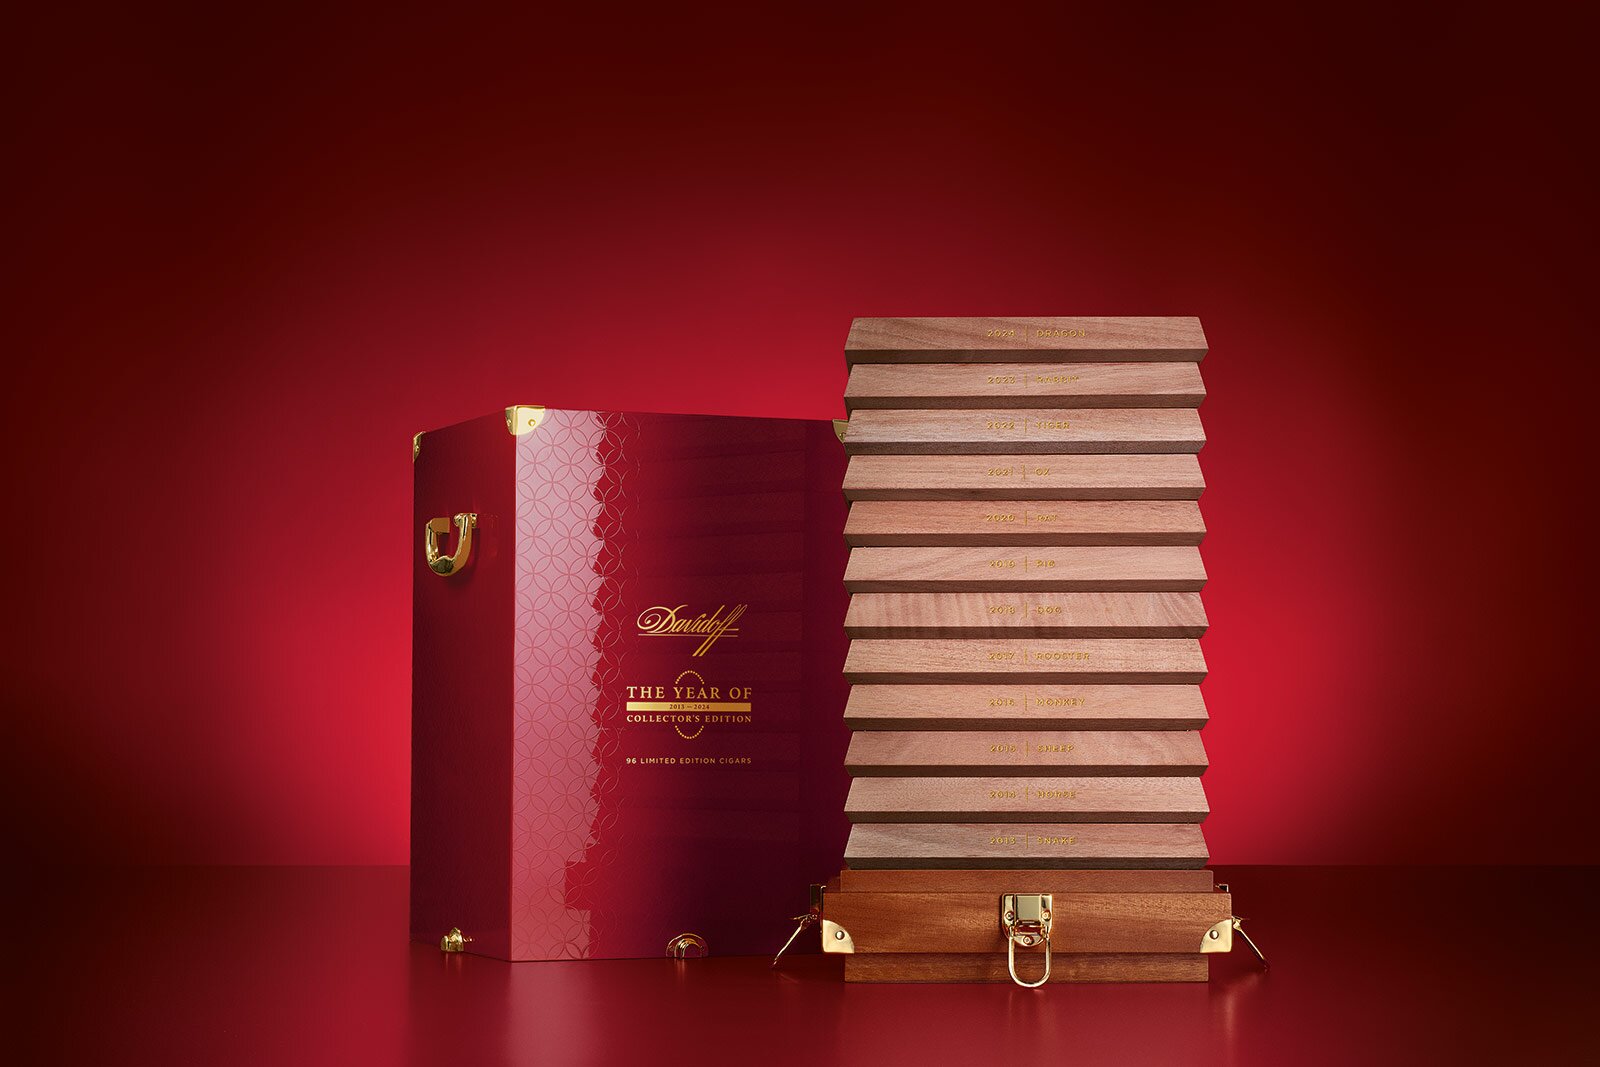 The closed red cabinet of the Davidoff The Year of Collector’s Edition.